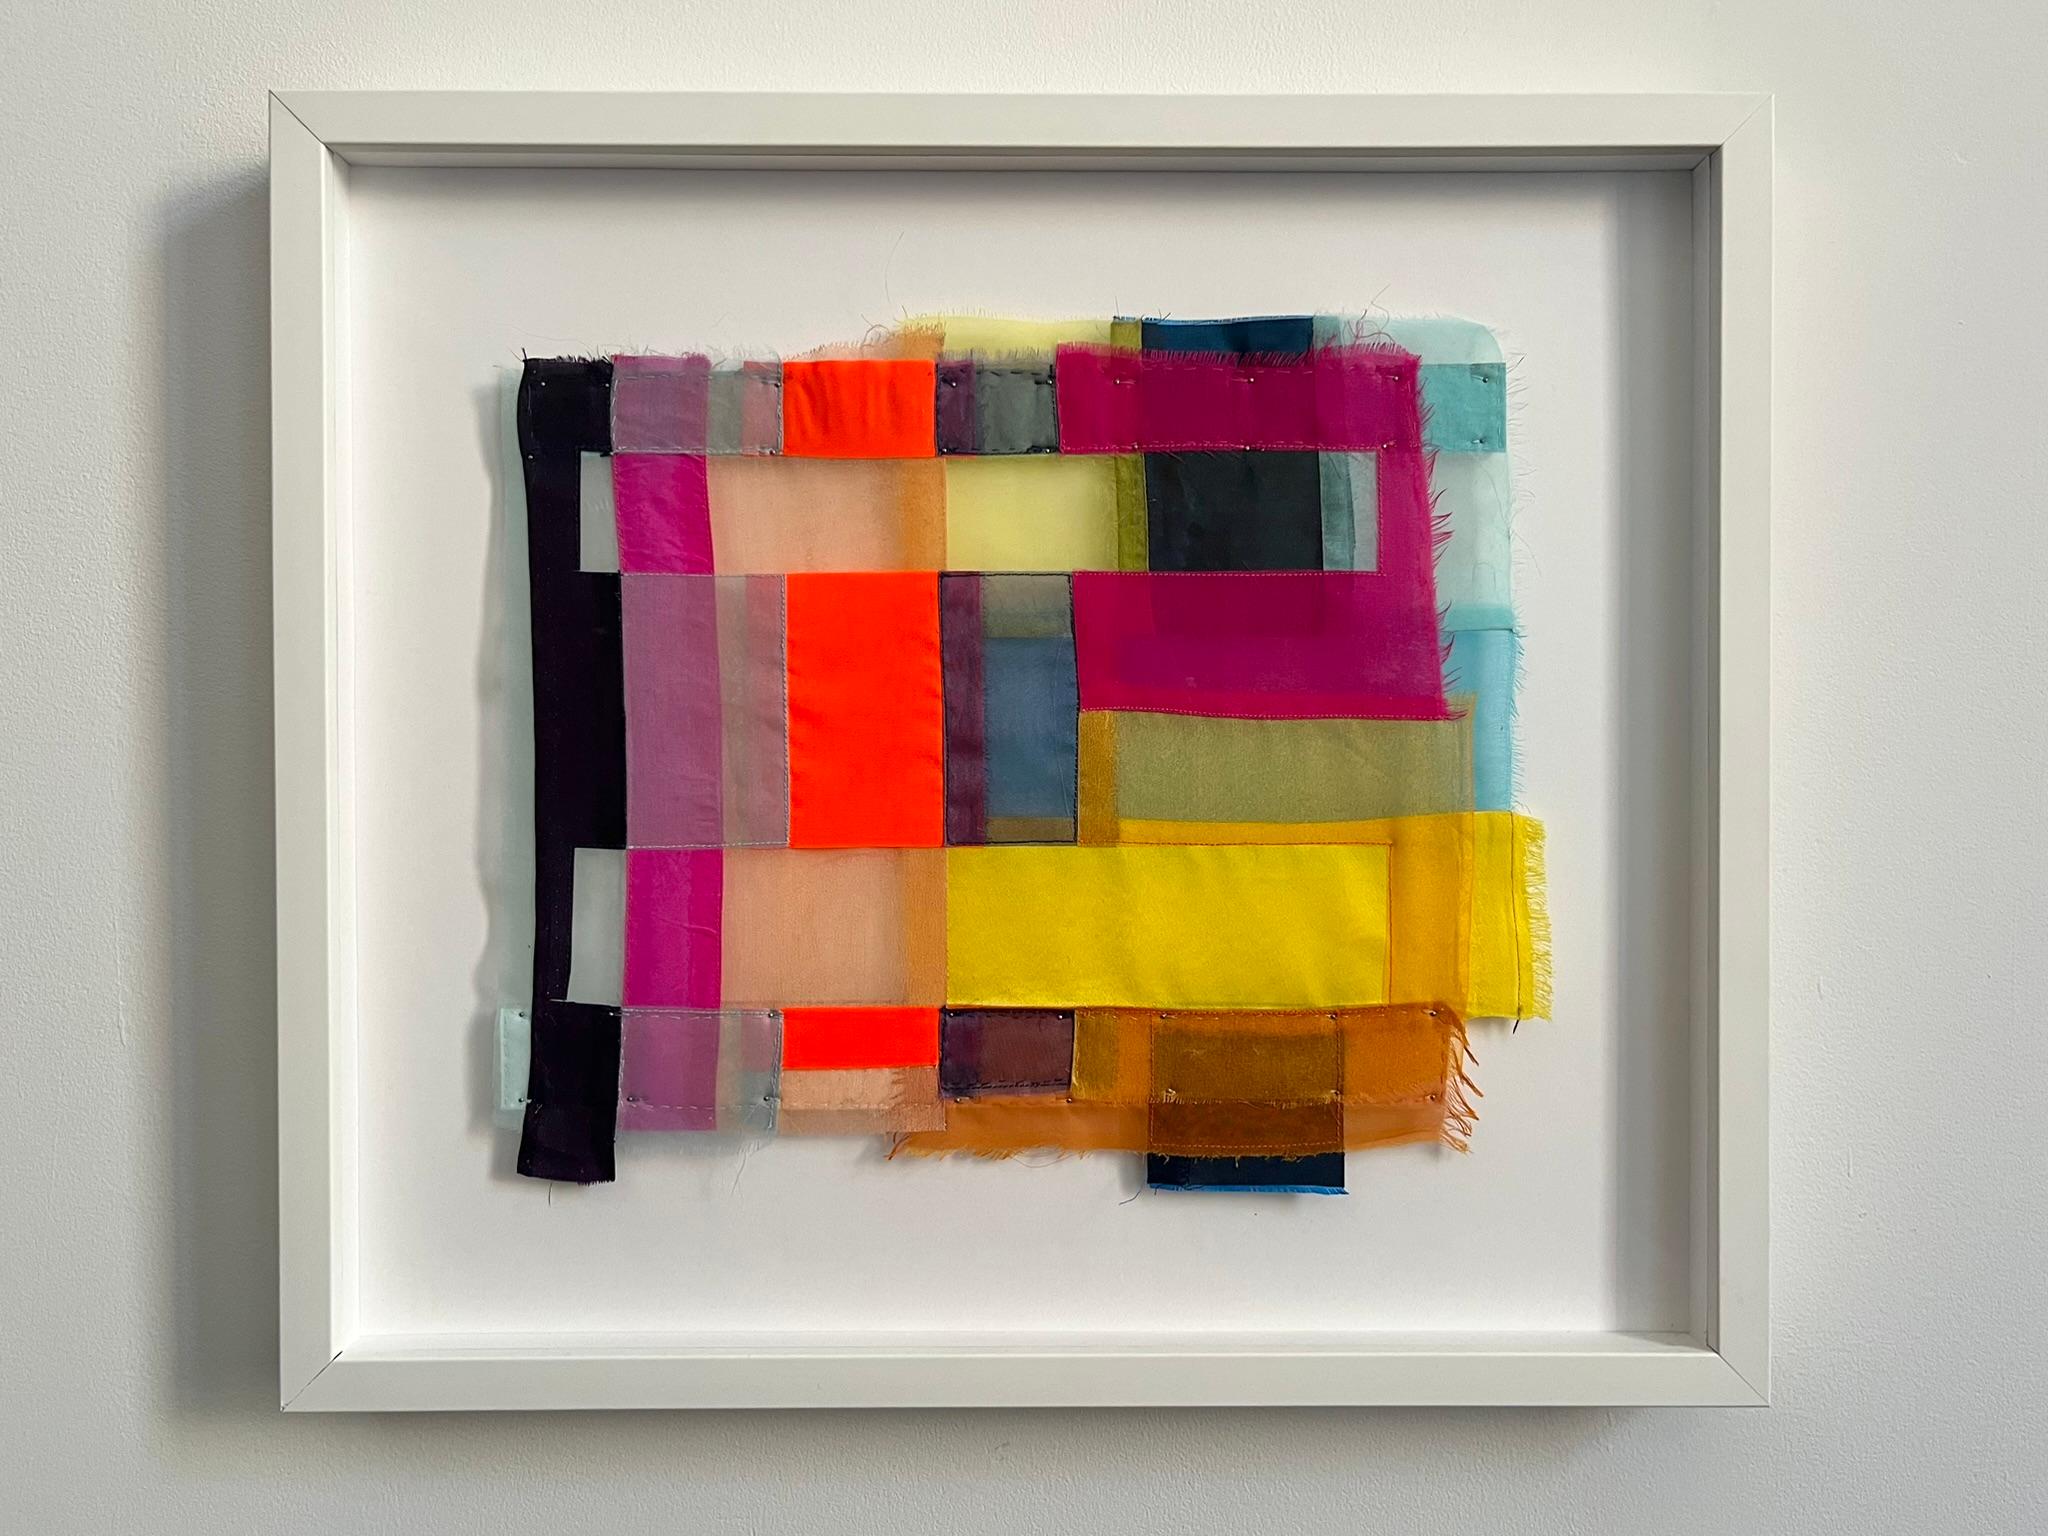 This work is framed with a simple white float to allow the jewel-like, diaphonous strips of fabric to glow without distraction.


Linda Kamille Schmidt received an MA in drawing and an MFA in painting from the University of Iowa. In 1989 she